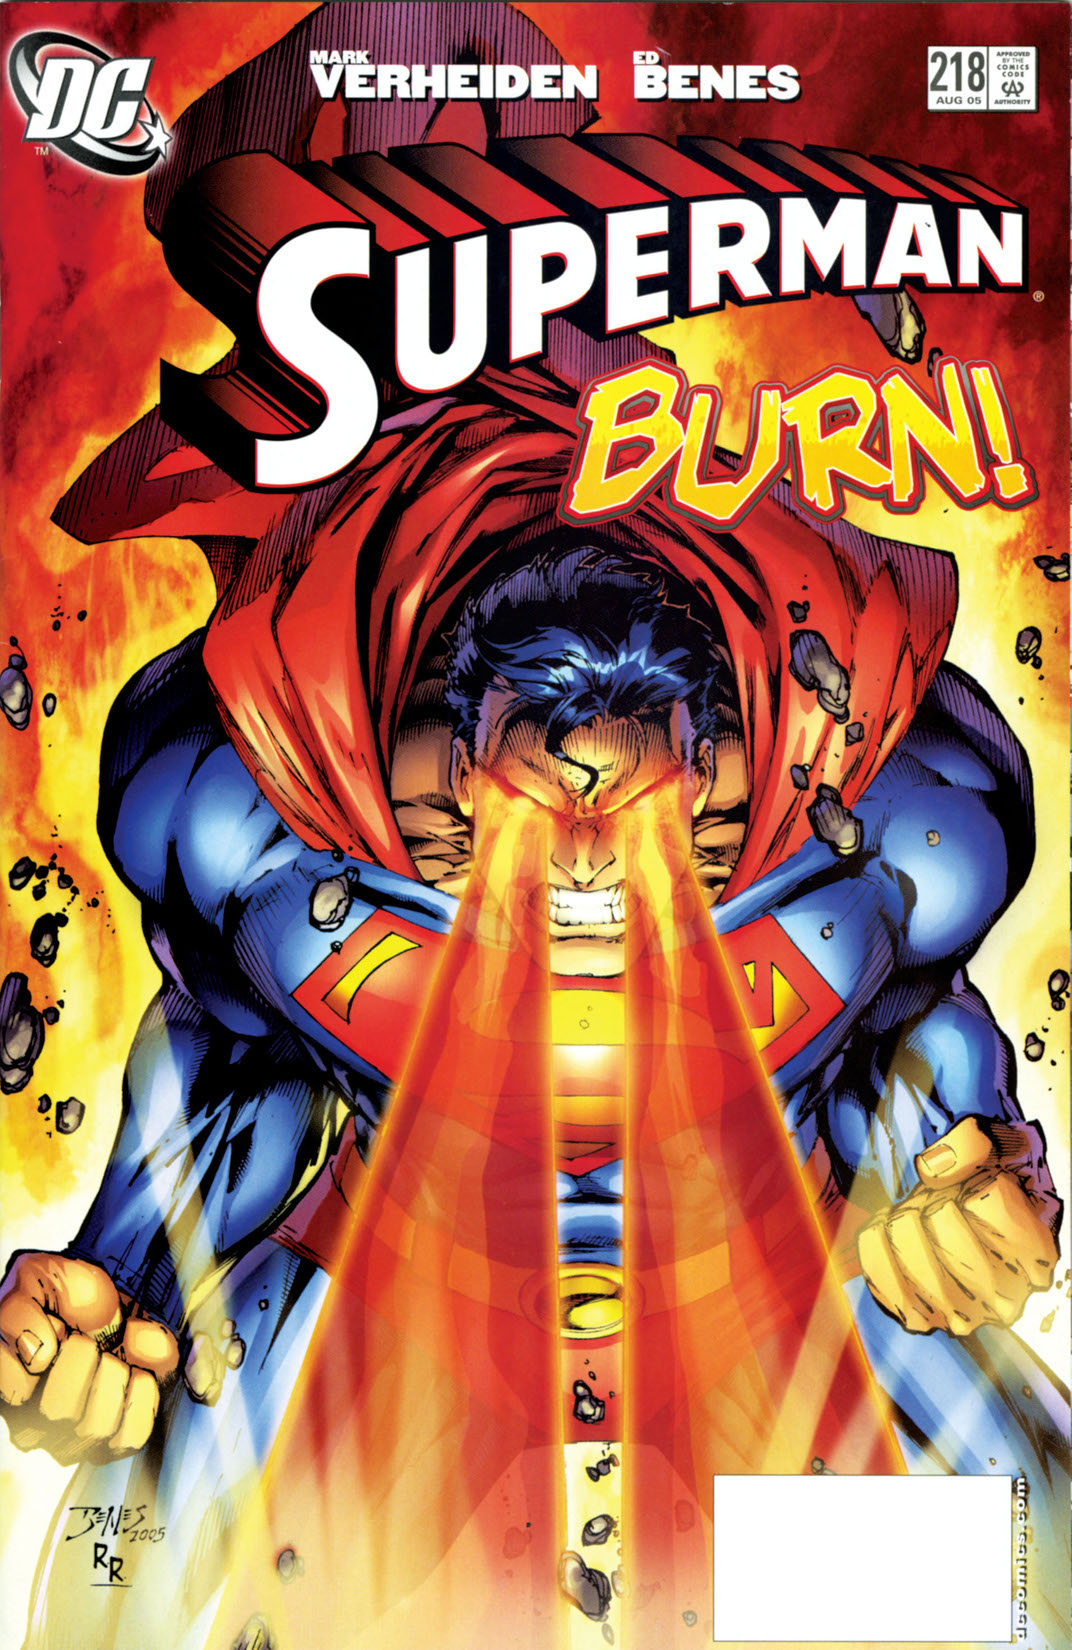 Superman (1986-) #218 preview images